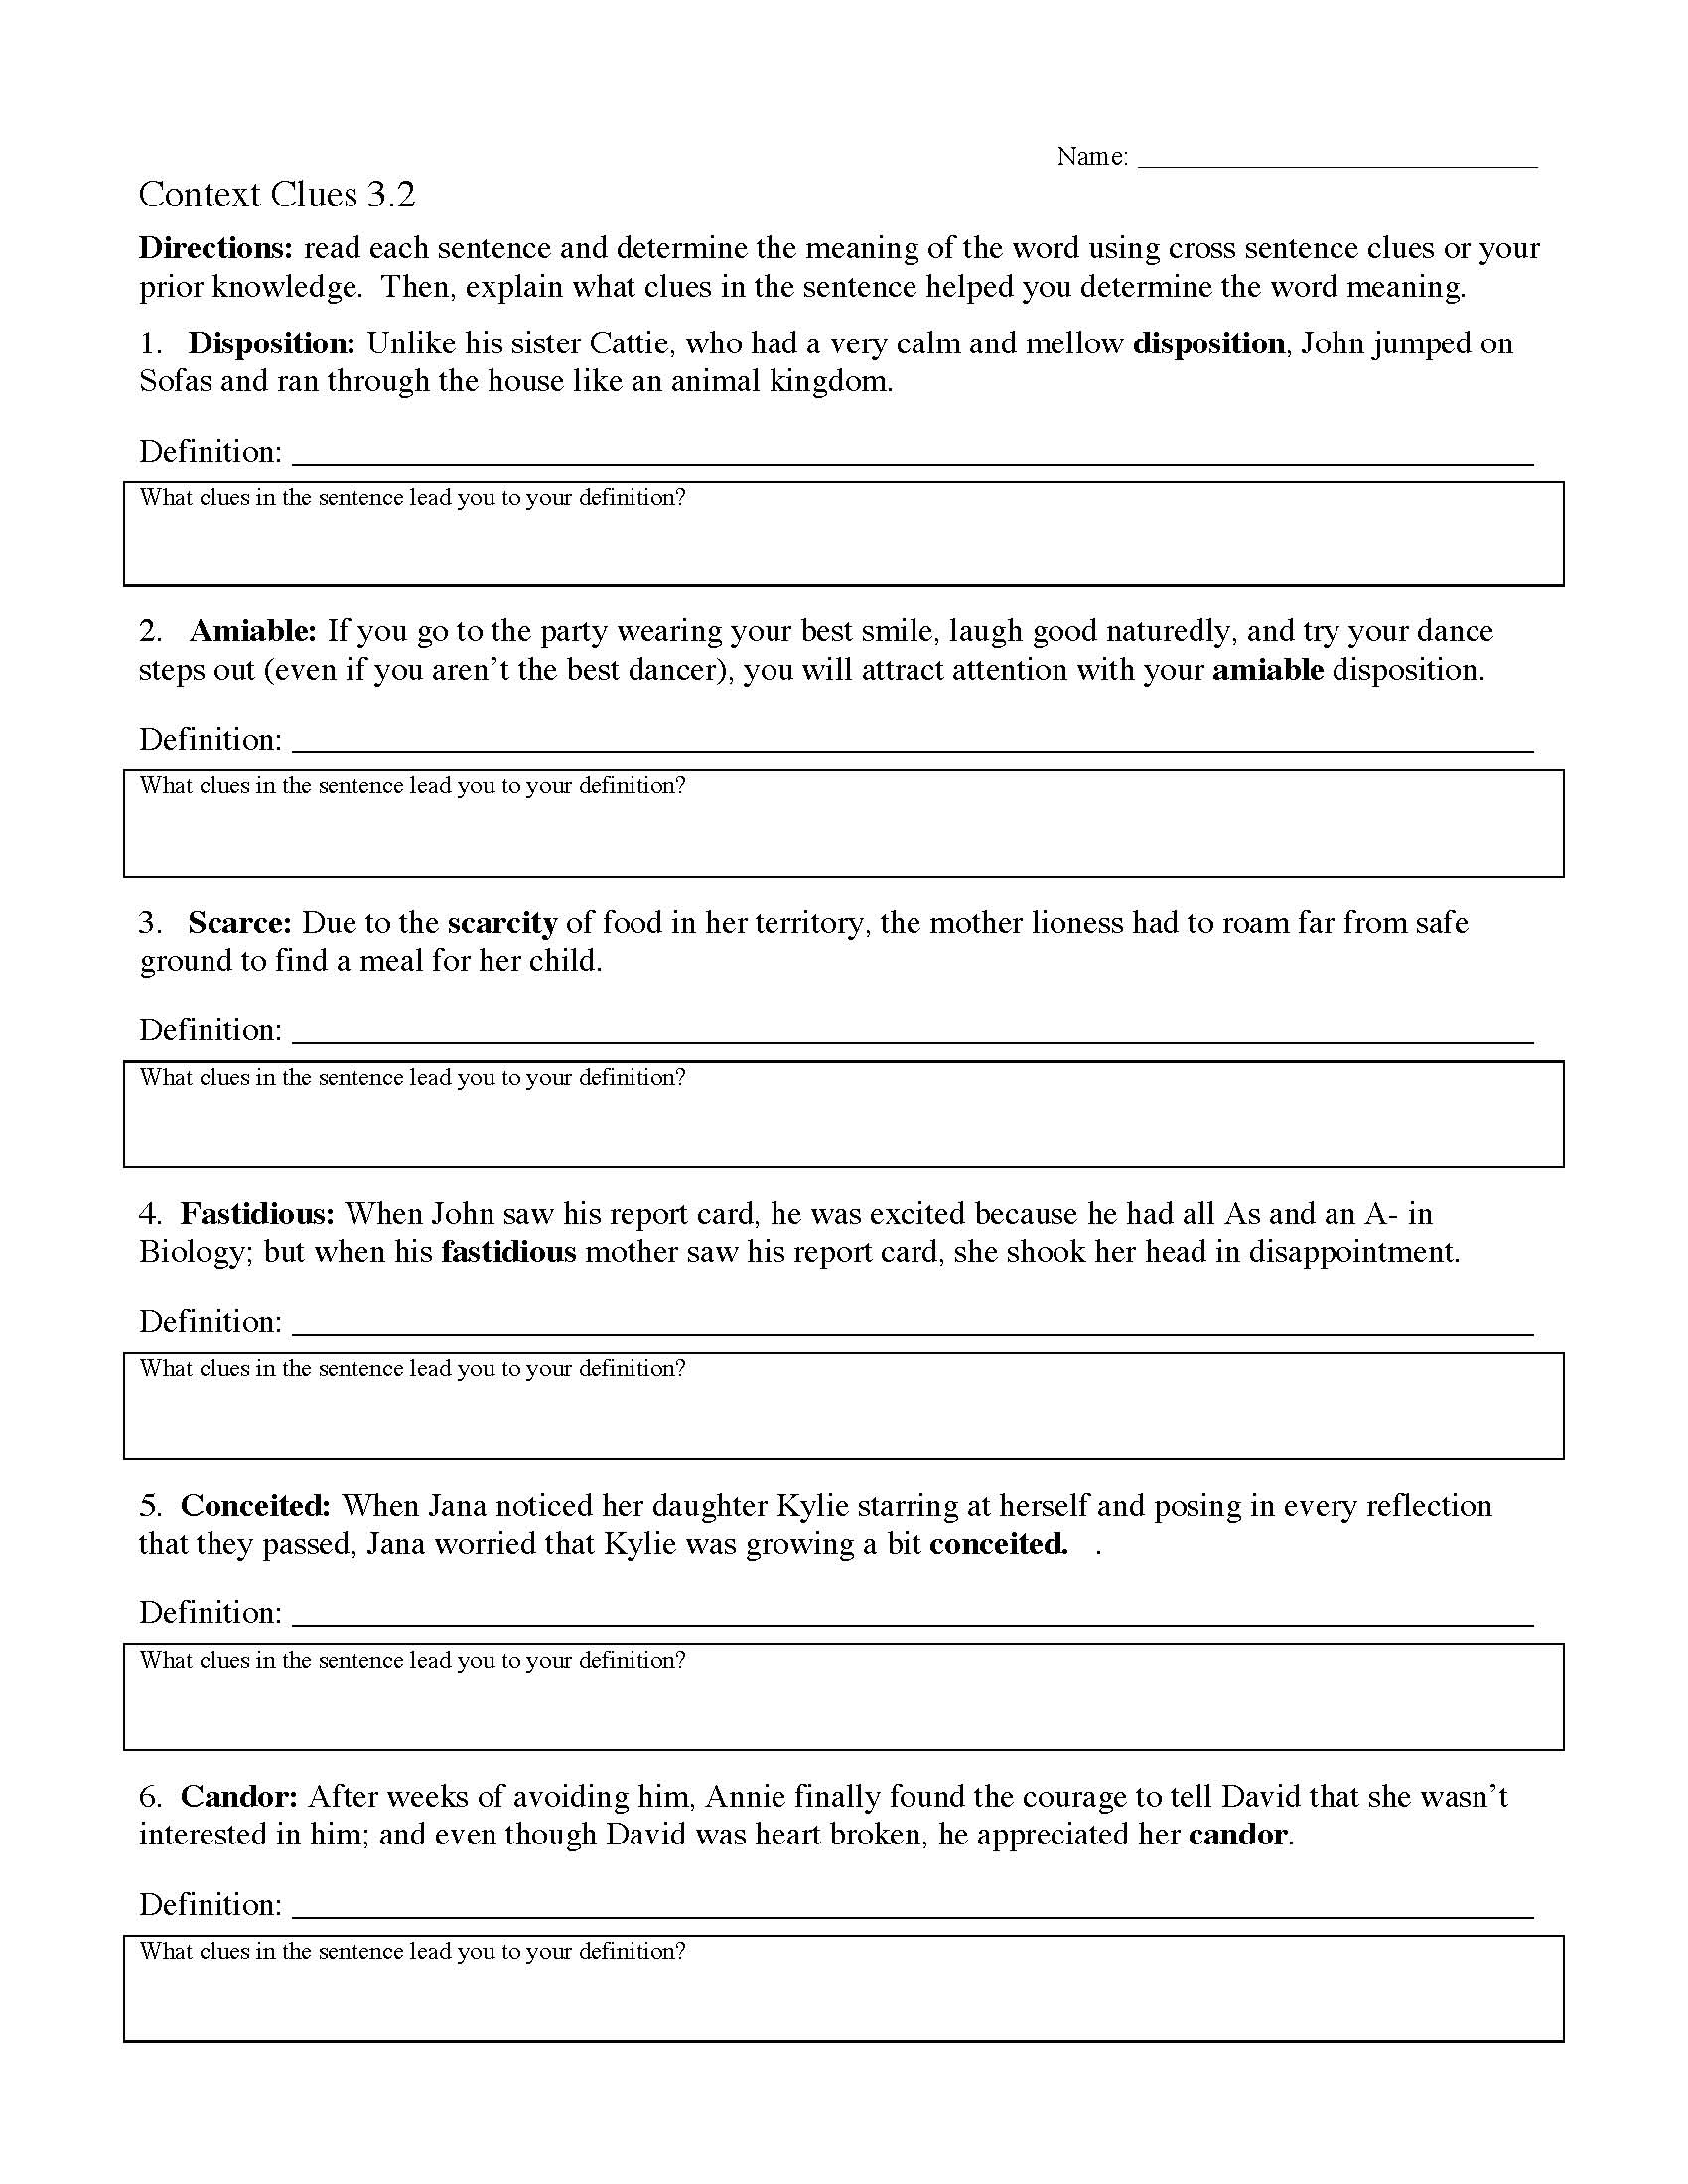 context-clues-worksheet-3-2-preview